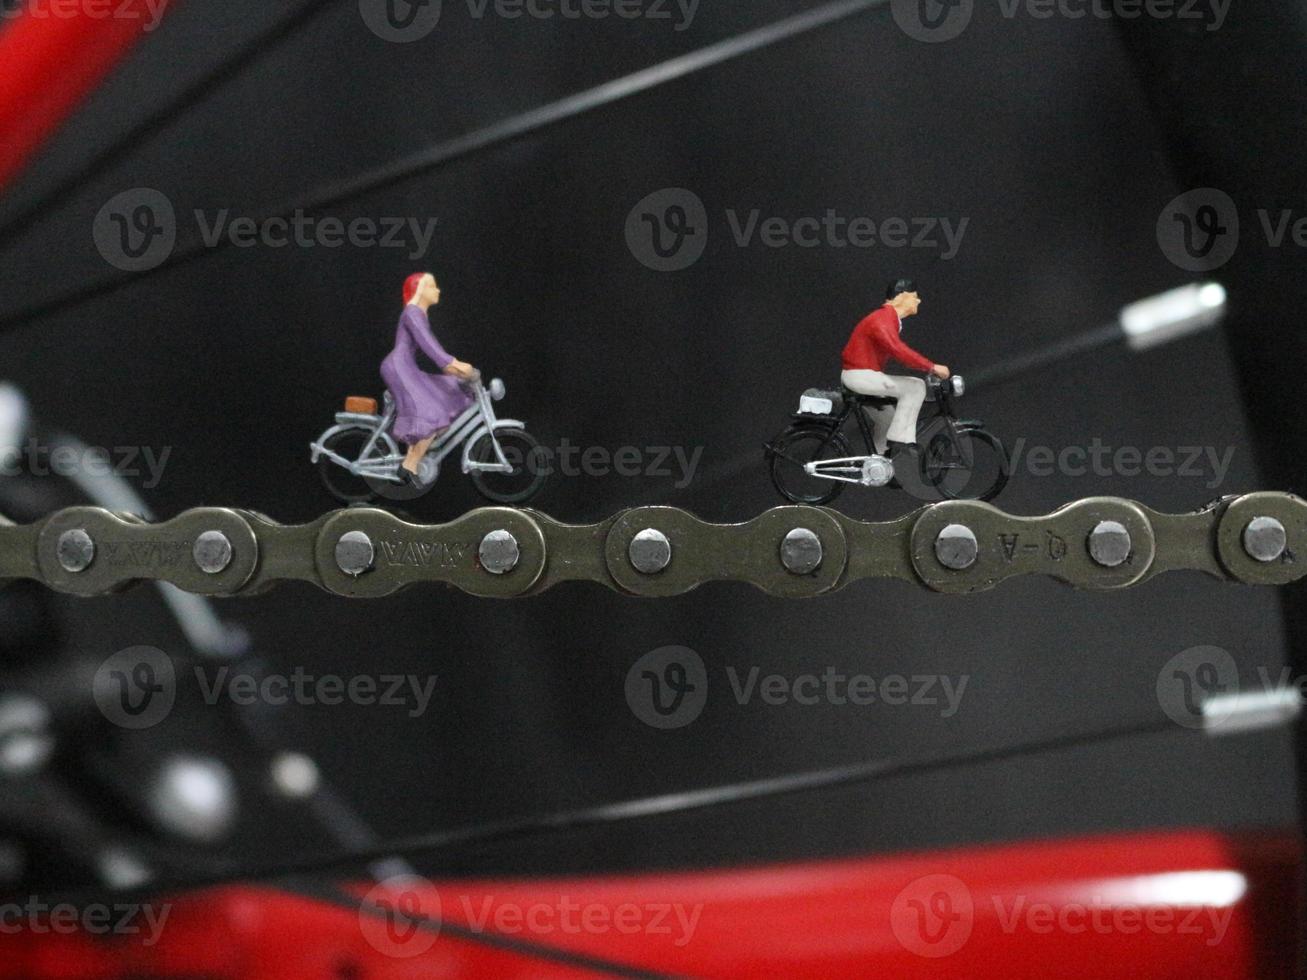 miniature figure of a cyclist riding on a bicycle chain. photo